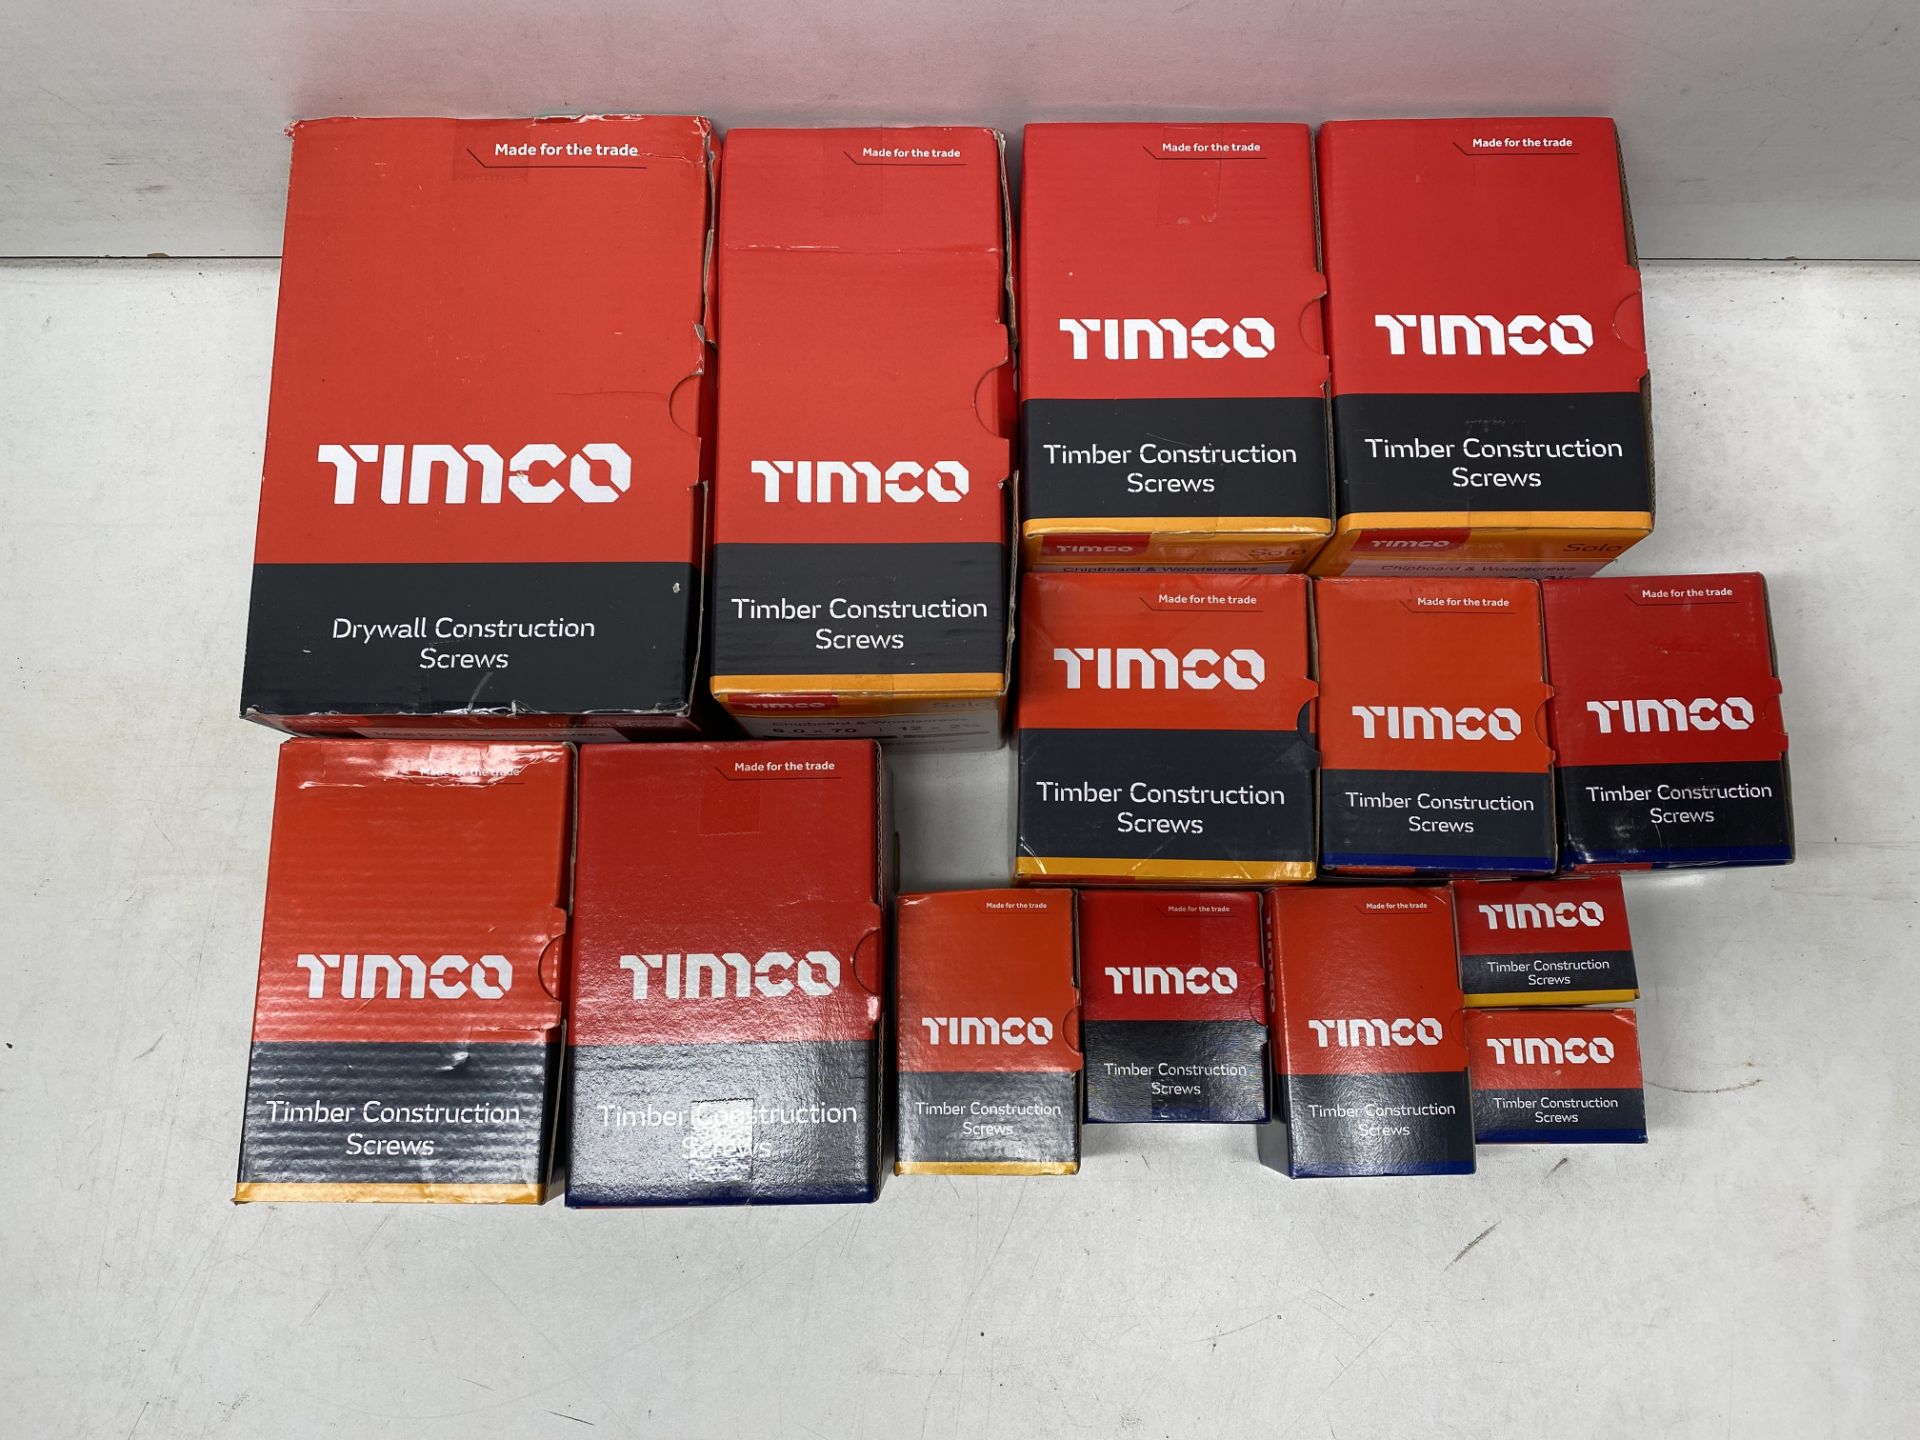 110 x Boxes Of Various Timco Timber Construction Screws As Seen In Photos - Image 2 of 16